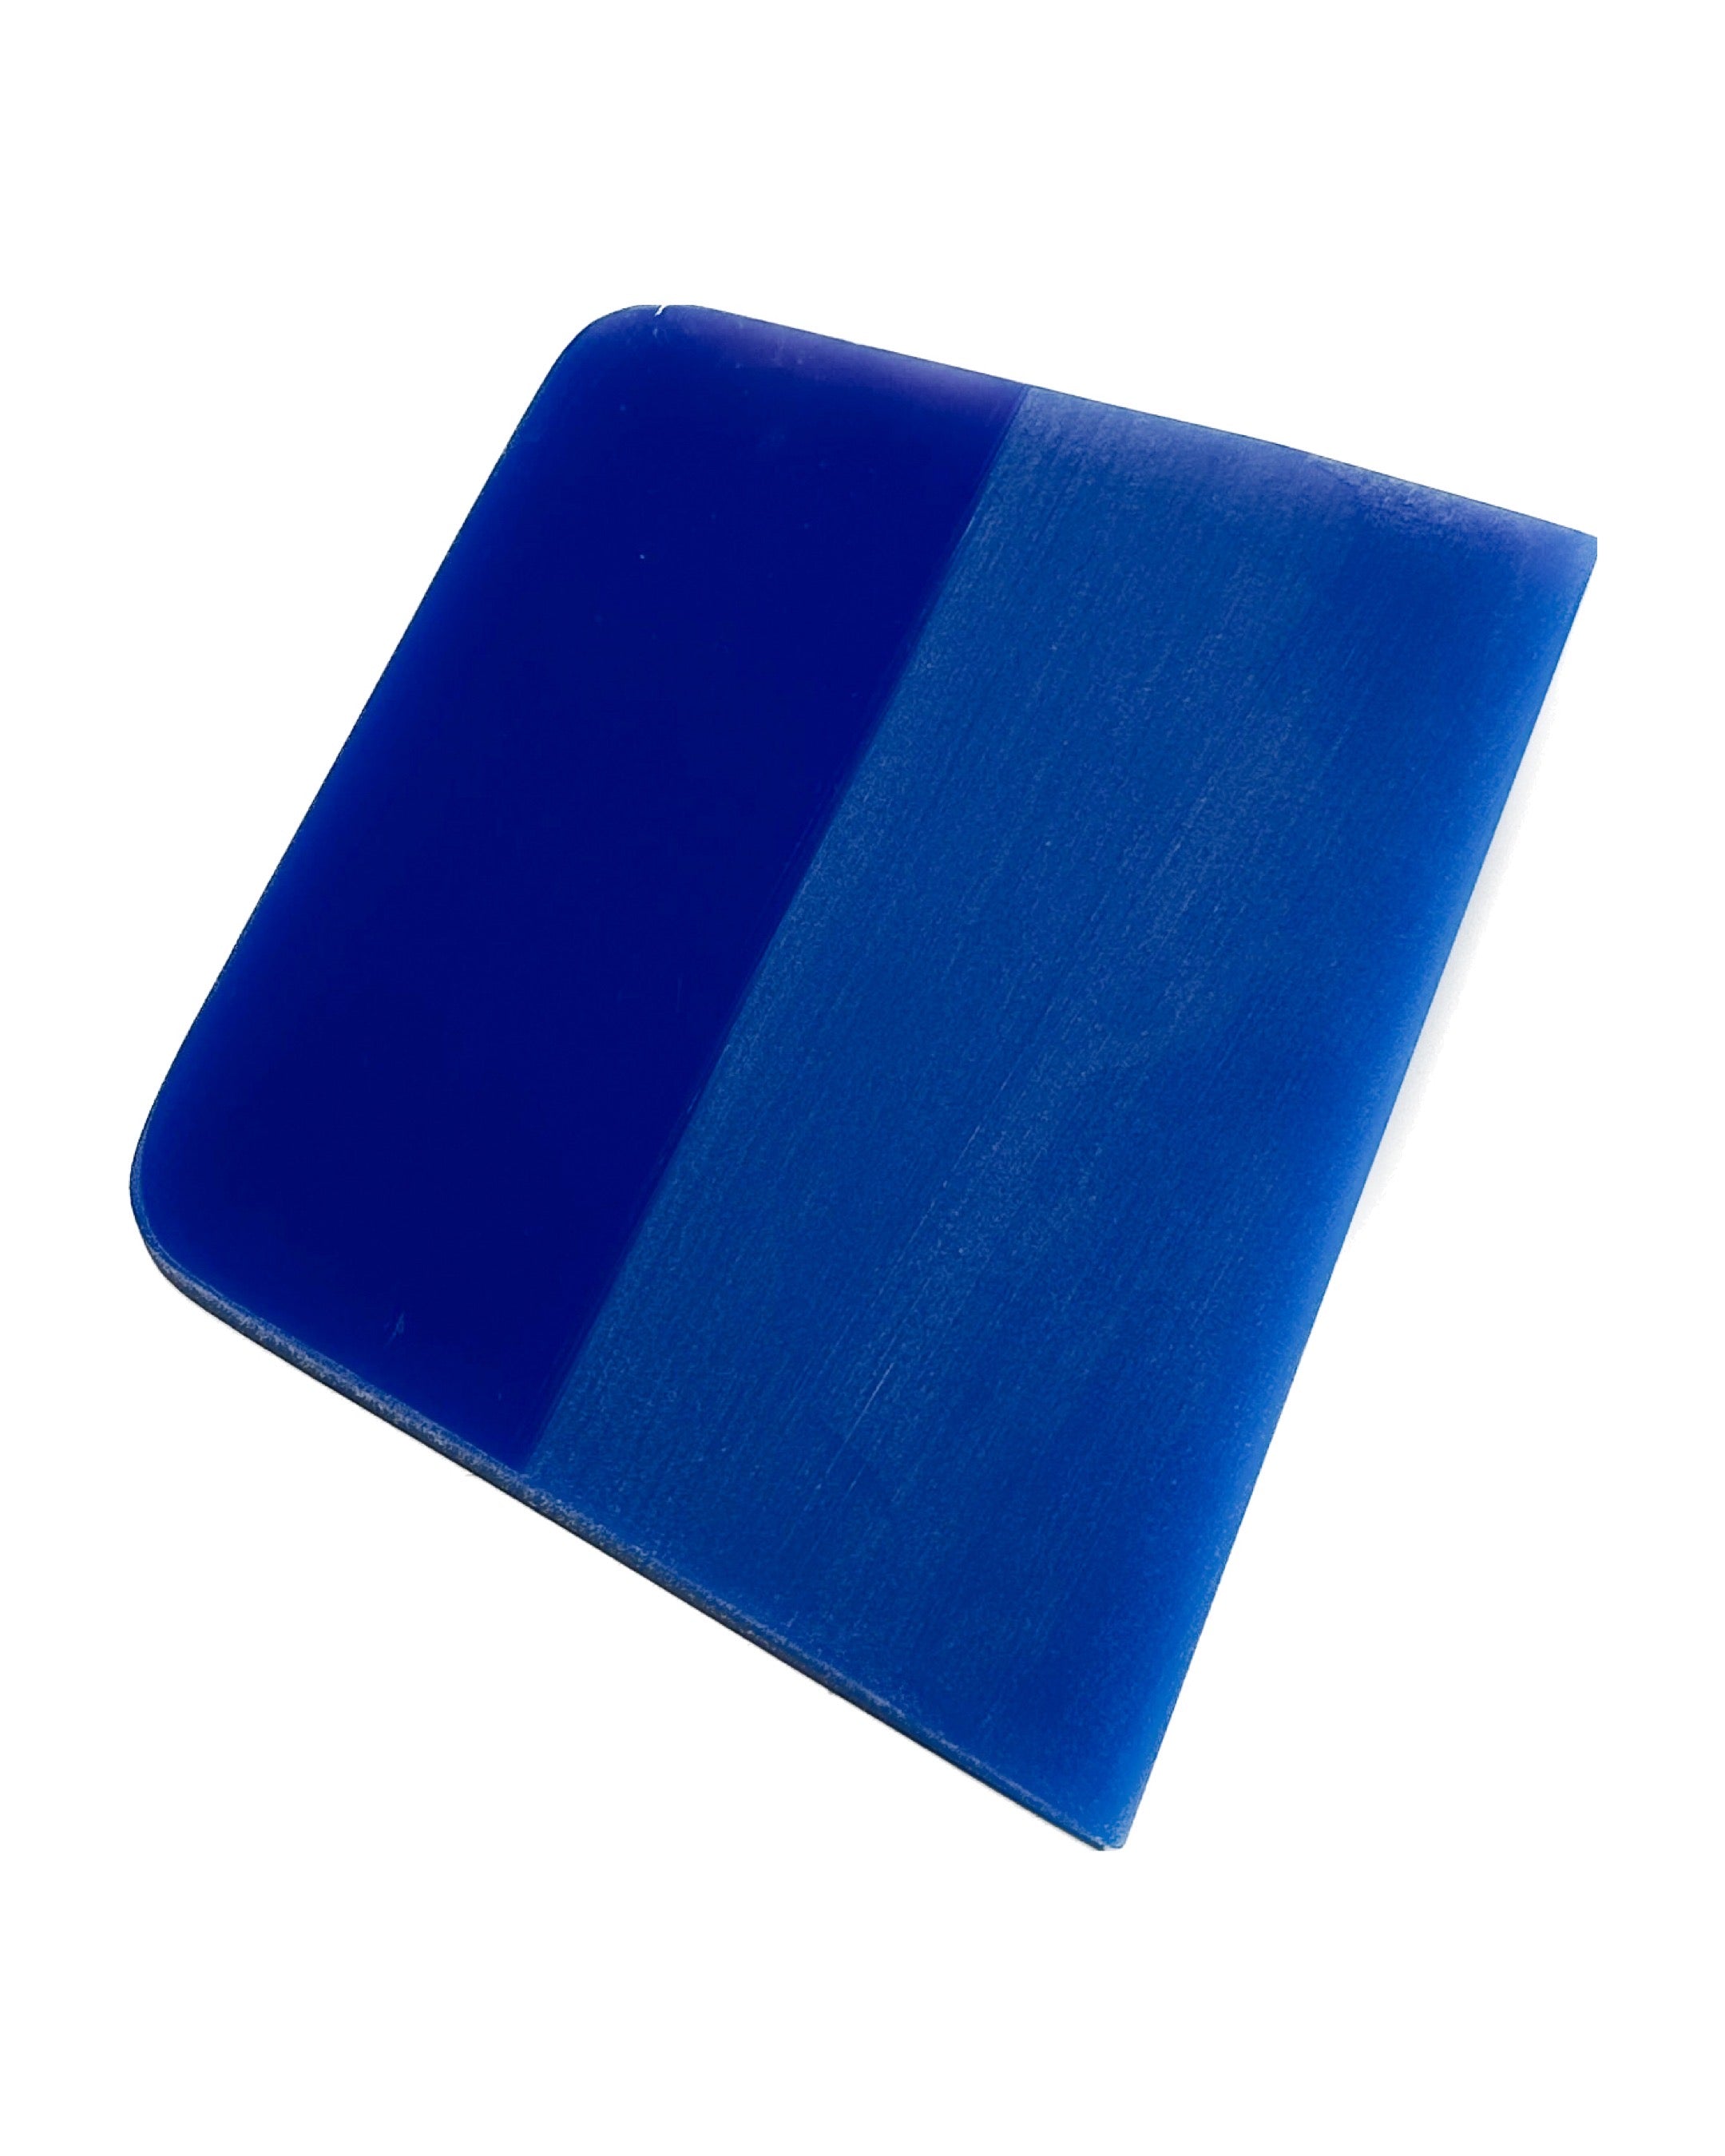 Cropped “Y style” PPF & Tint Squeegee